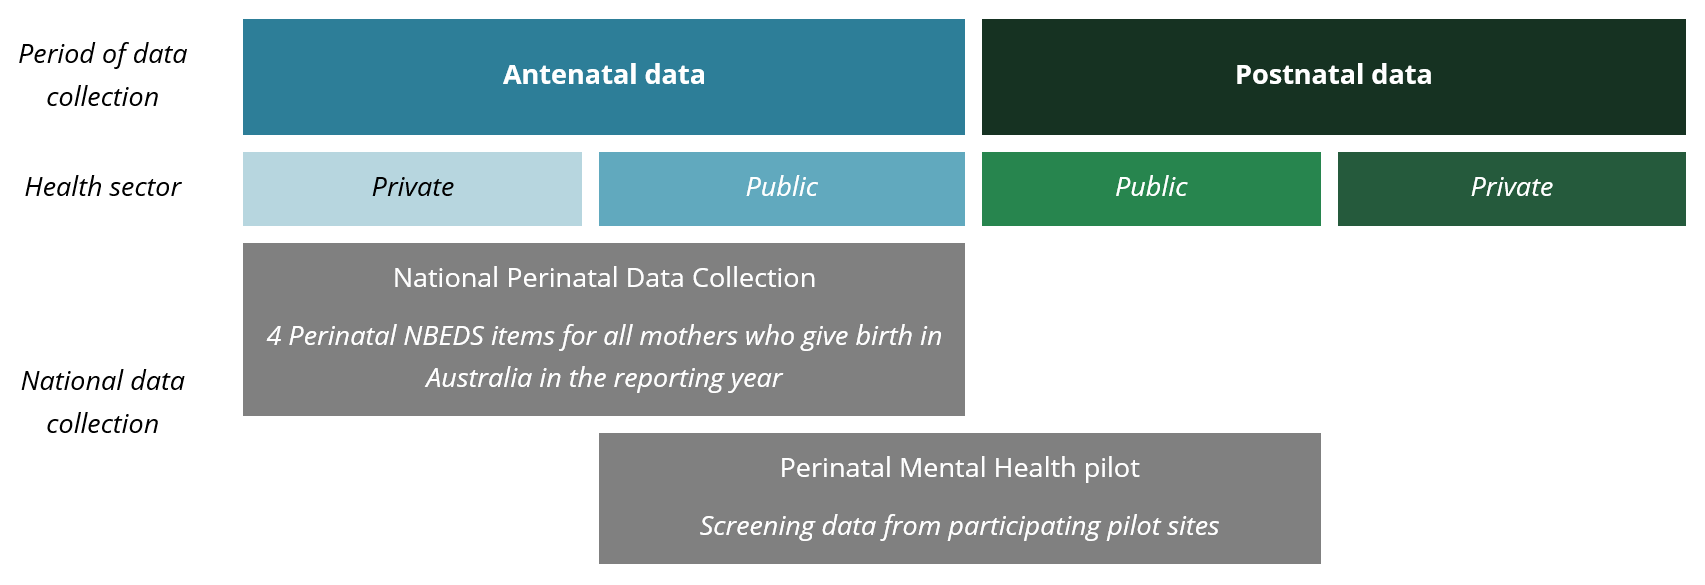 The NPDC includes antenatal data for all mothers who give birth in Australia. The PMHp includes participating public antenatal and postnatal sites.